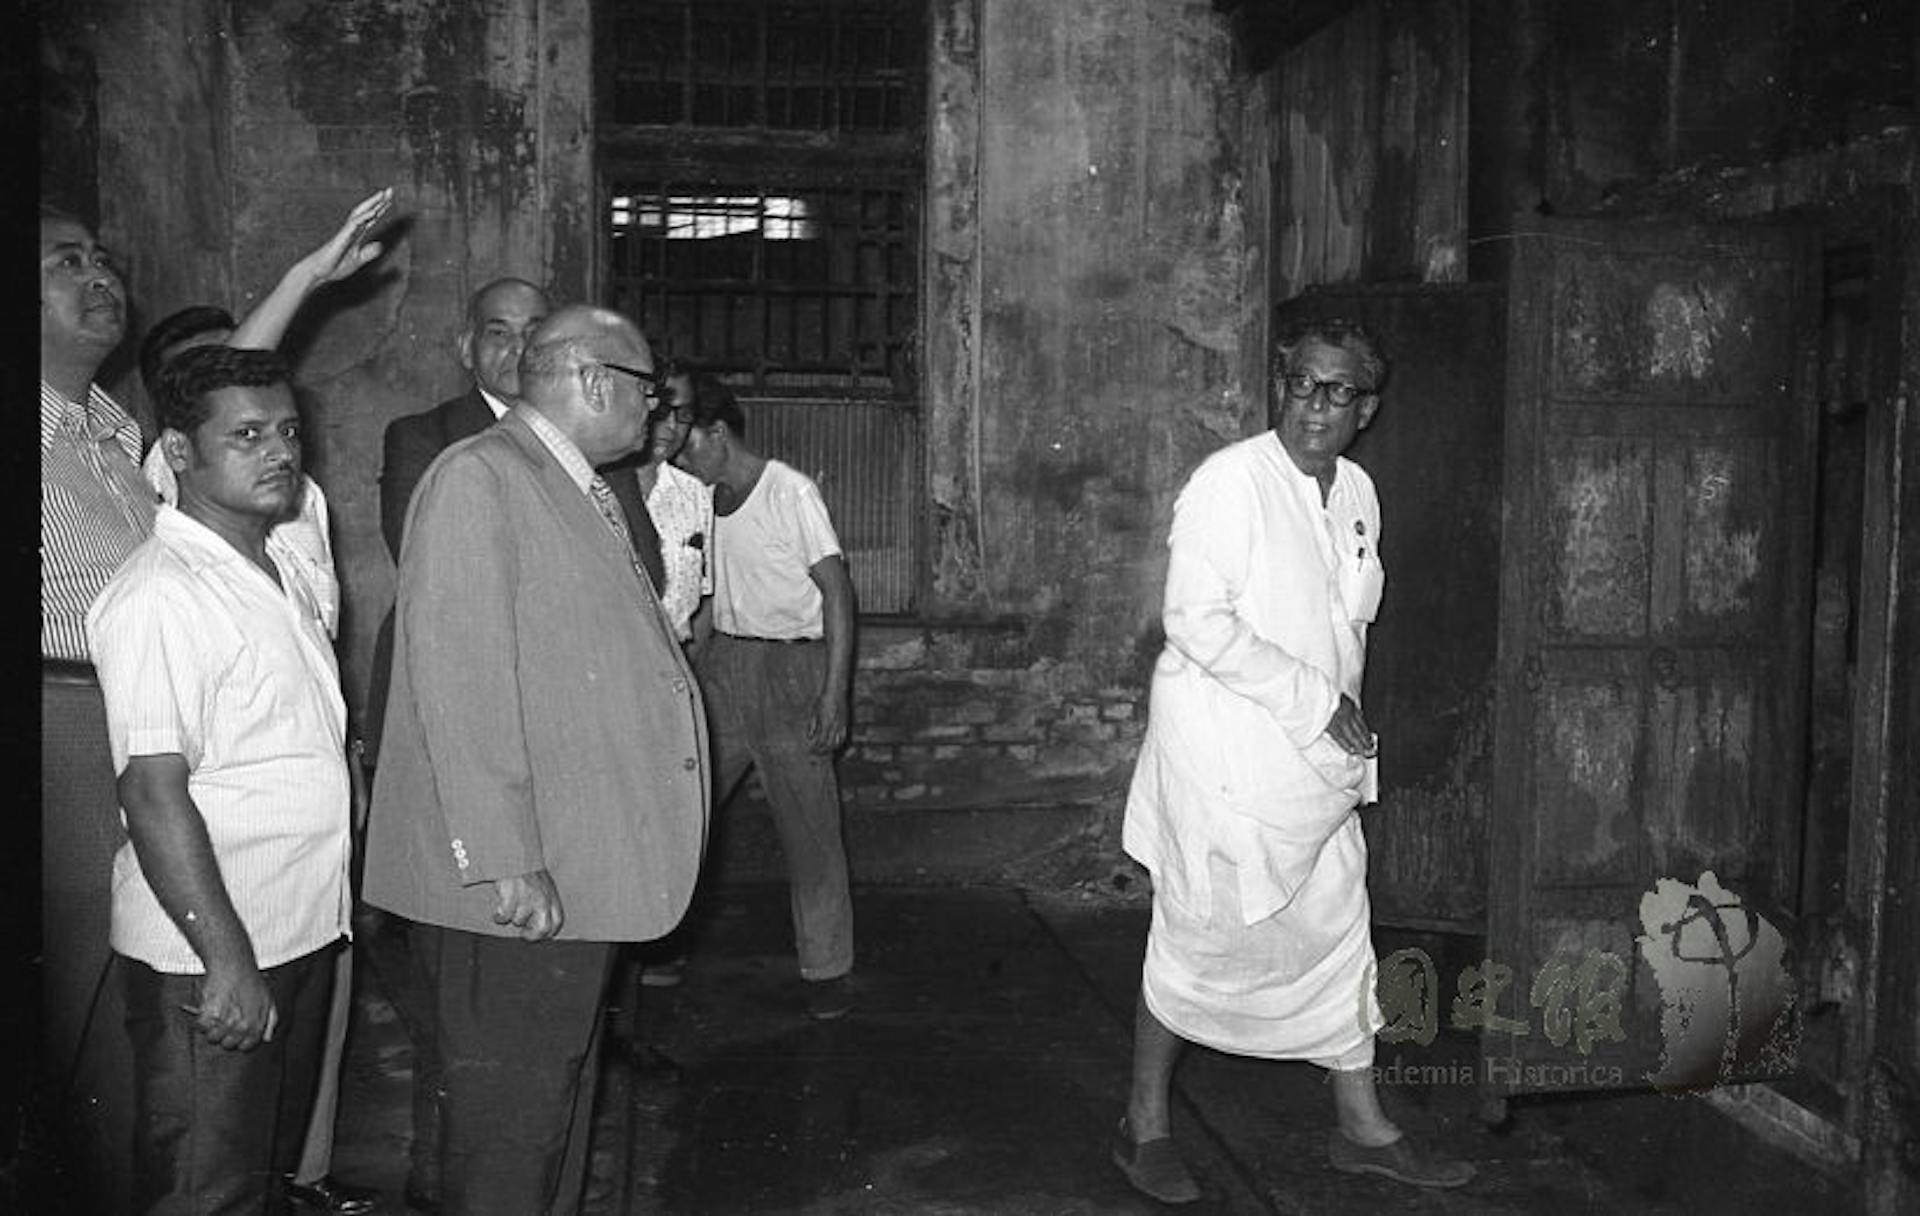 The inquiry party at the crematorium on Xinsheng North Road, where Bose was cremated. Samar Guha is in the white dhoti and kurta, July 1973. Credit: Academia Historica